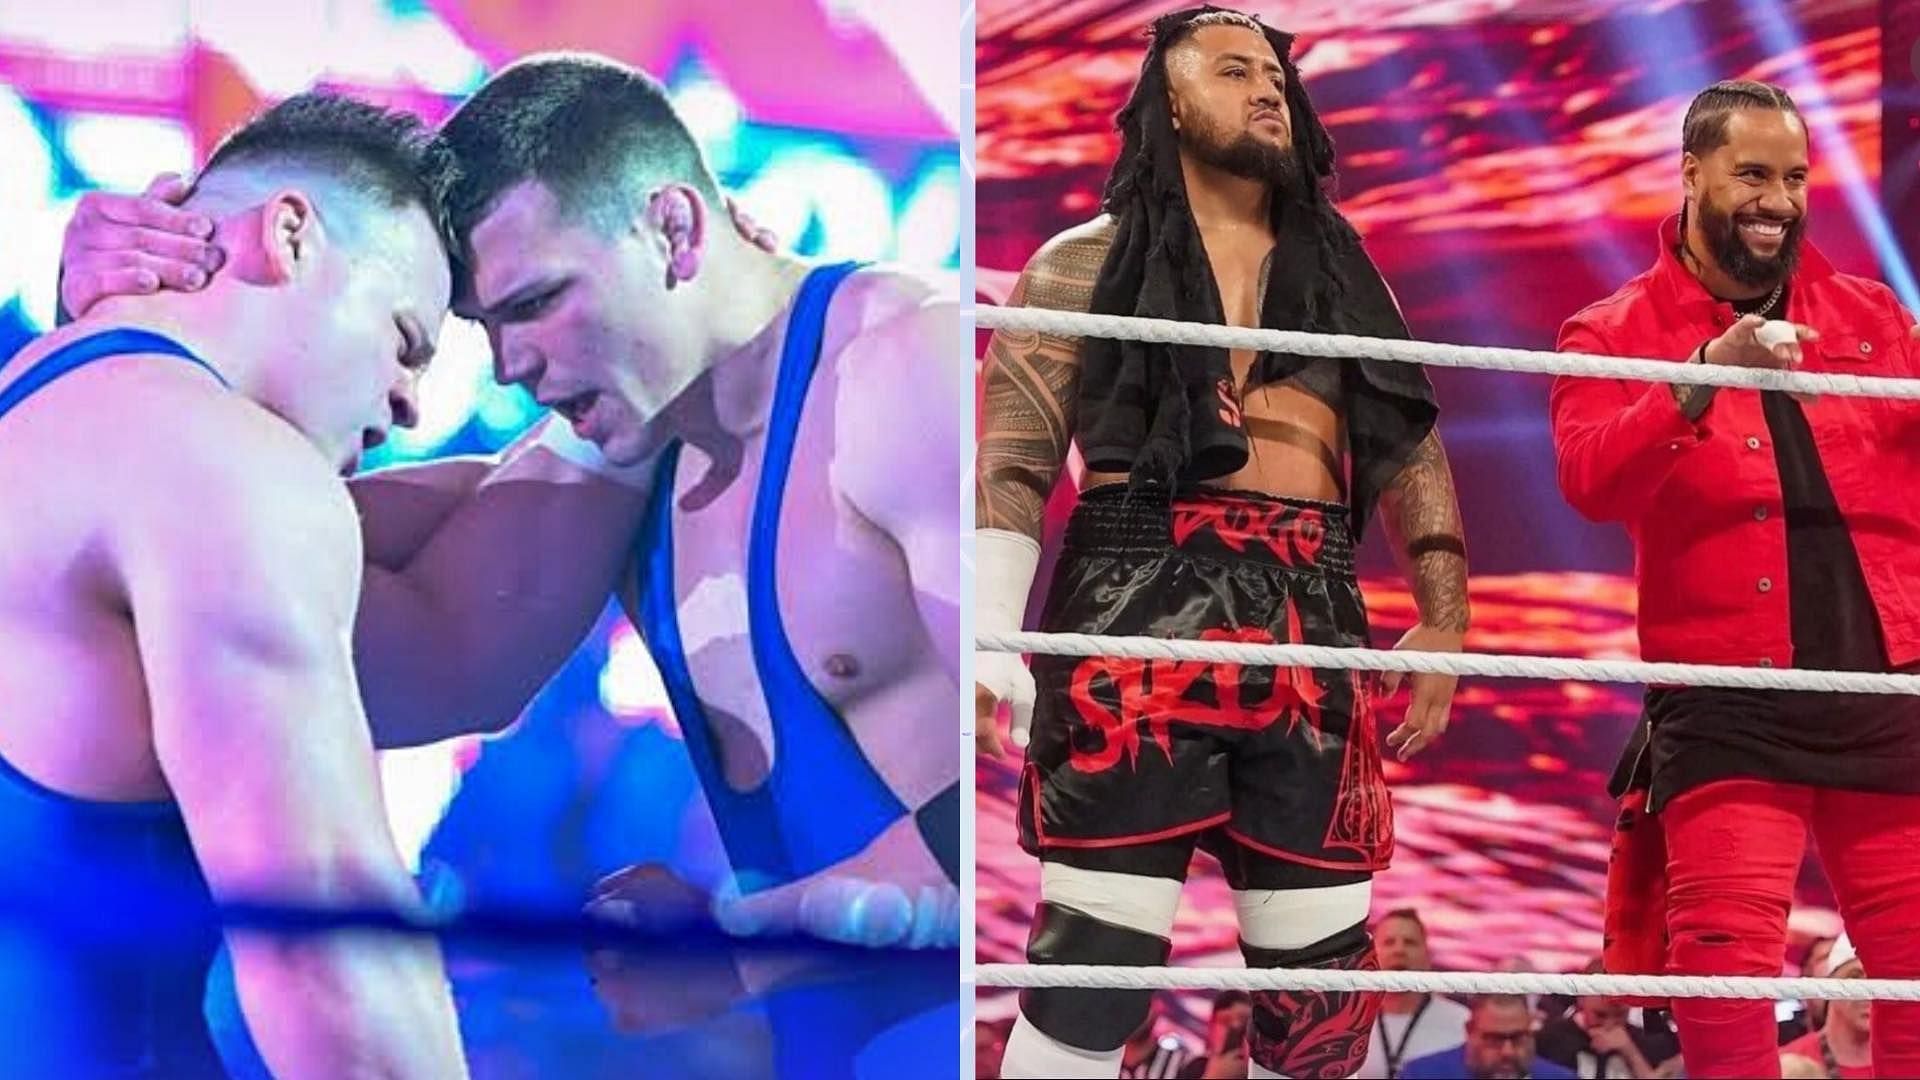 The Creed Brothers may be appearing on WWE SmackDown